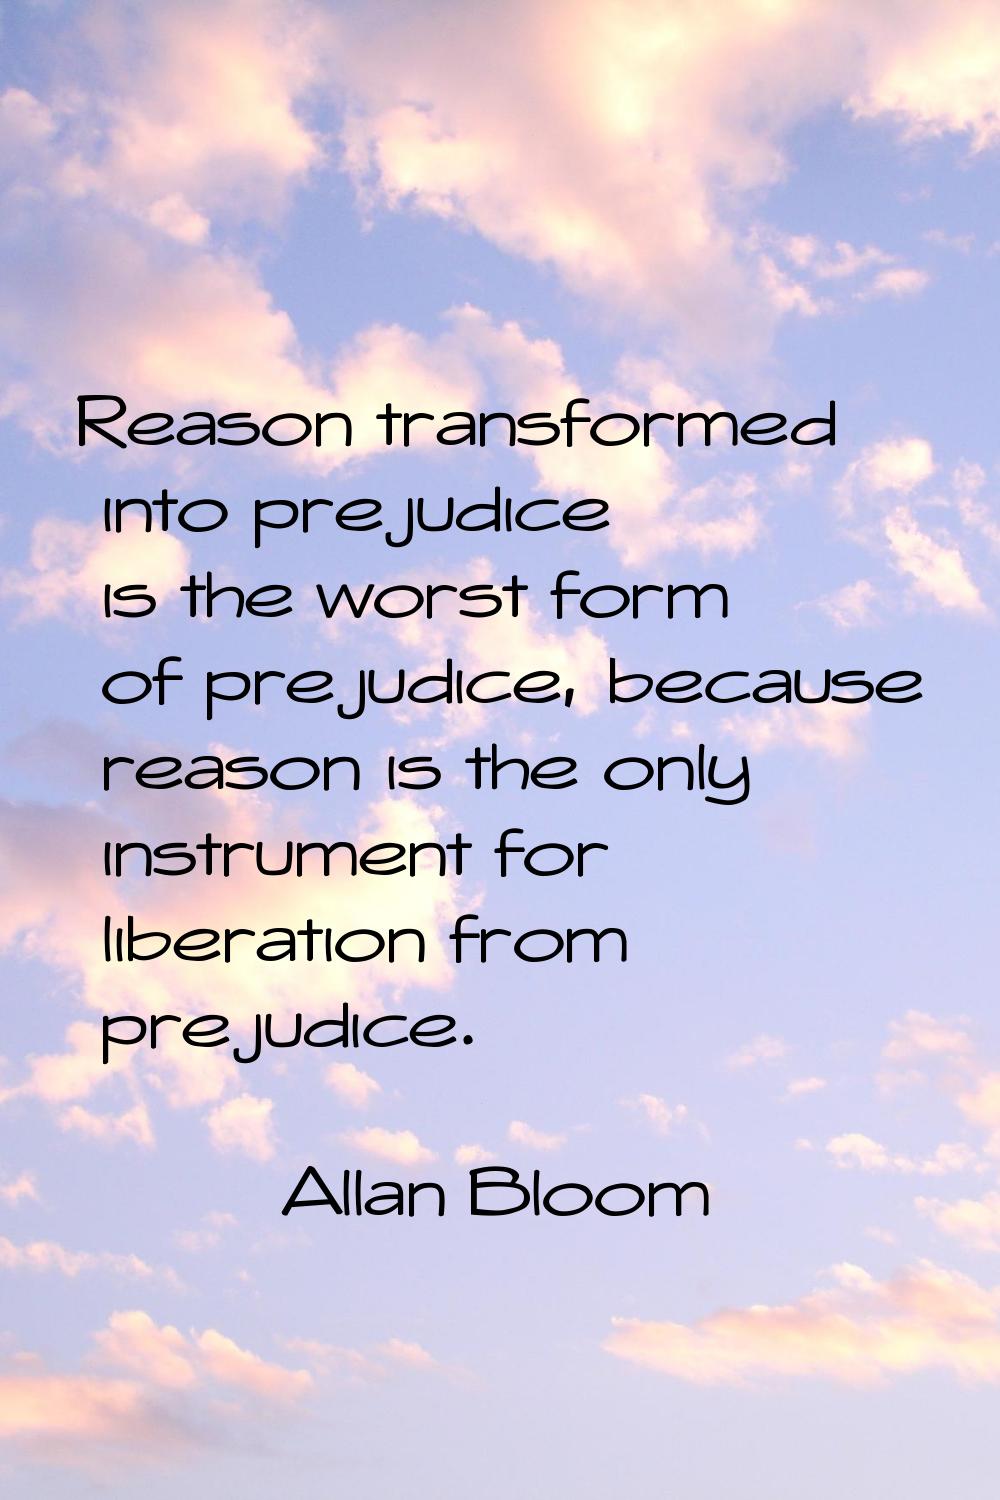 Reason transformed into prejudice is the worst form of prejudice, because reason is the only instru